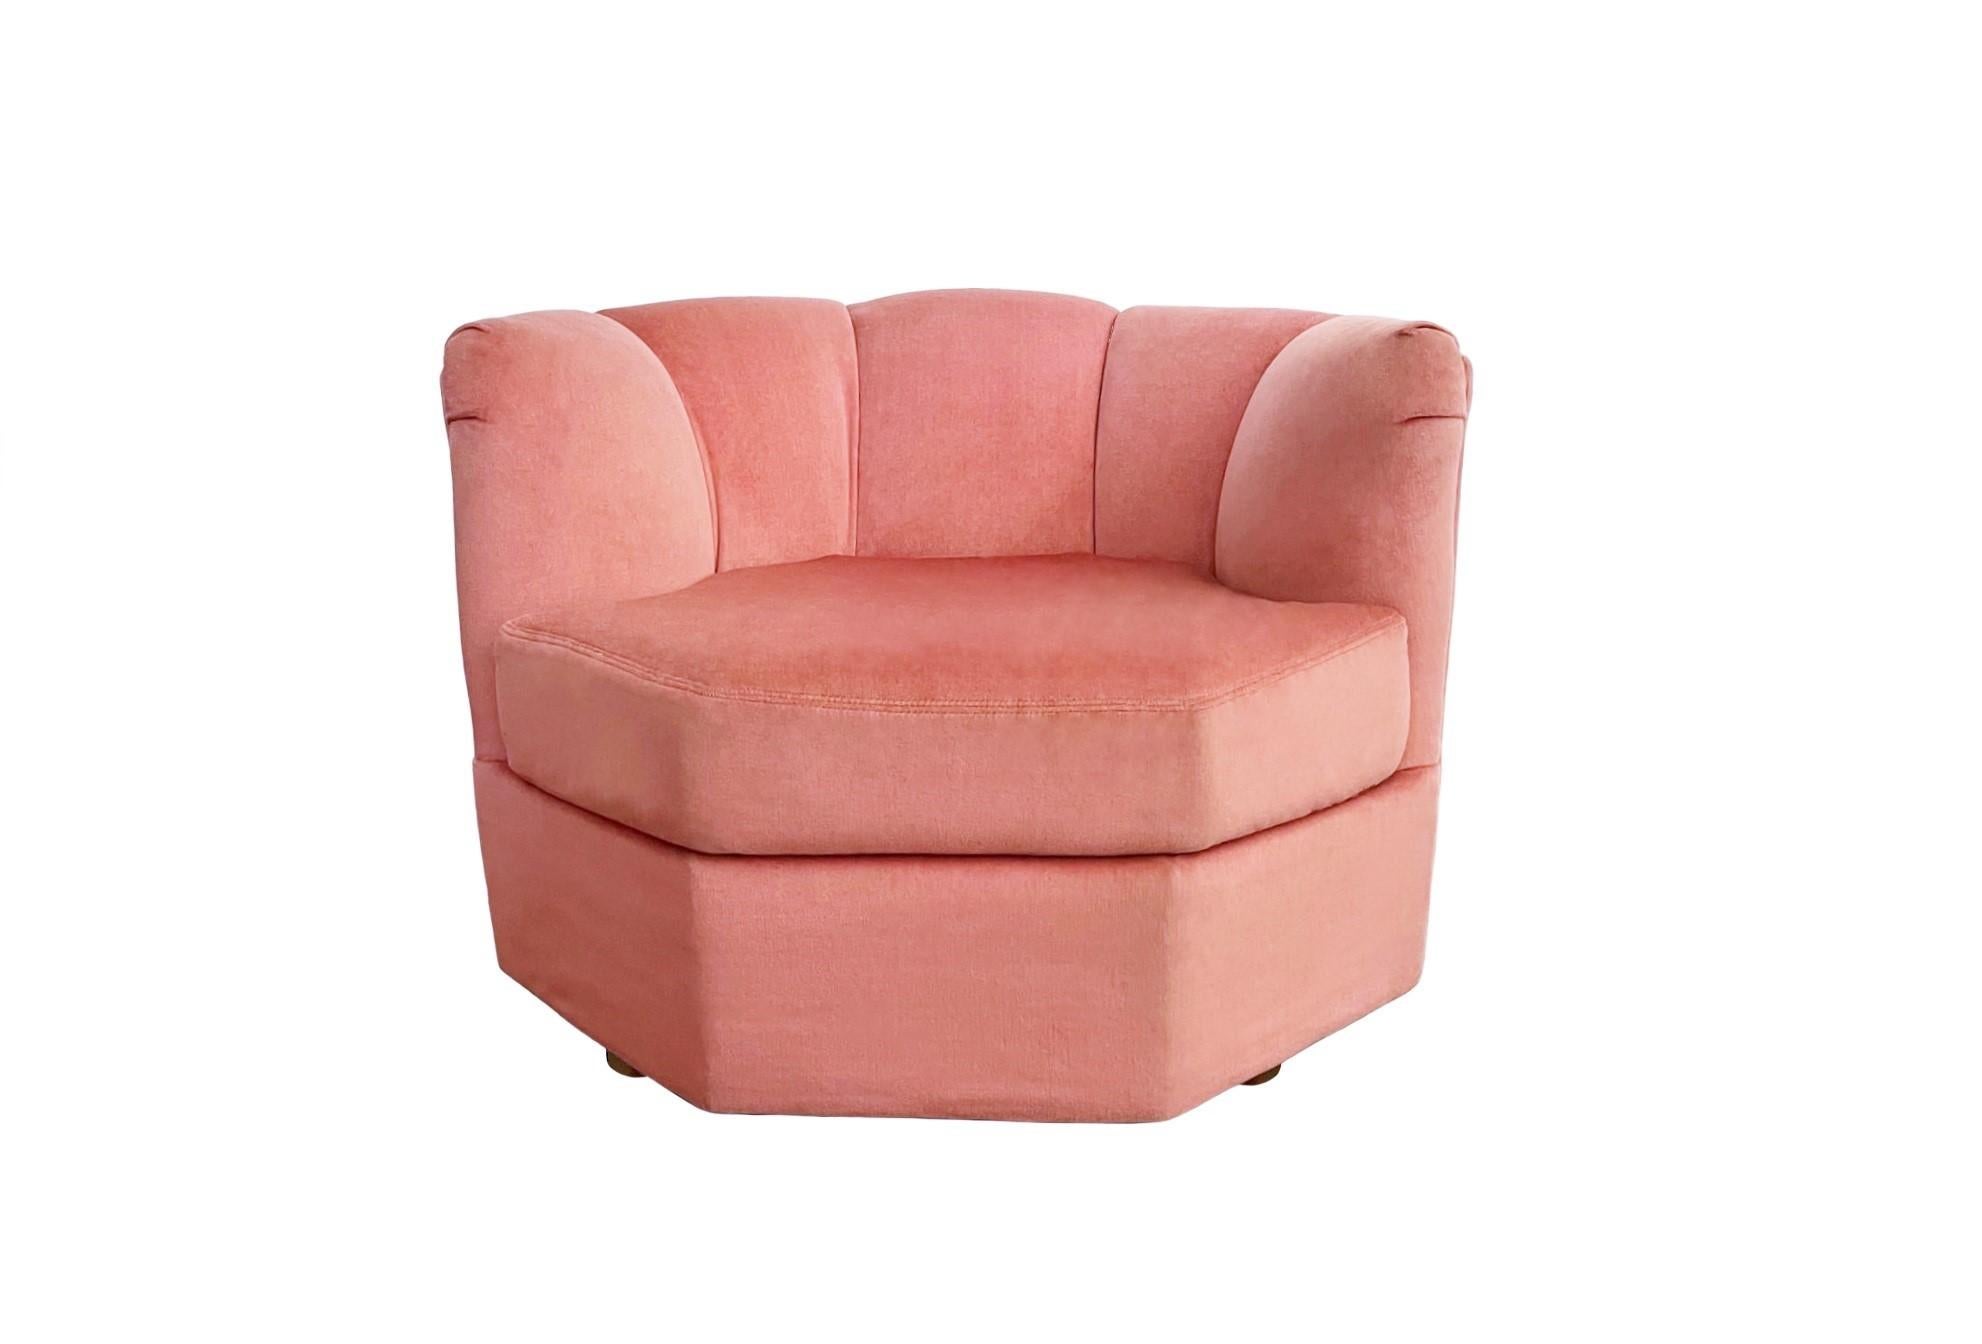 Mid-Century Modern 1970s Hexagonal Club Chairs in a Dusty Rose Velvet For Sale